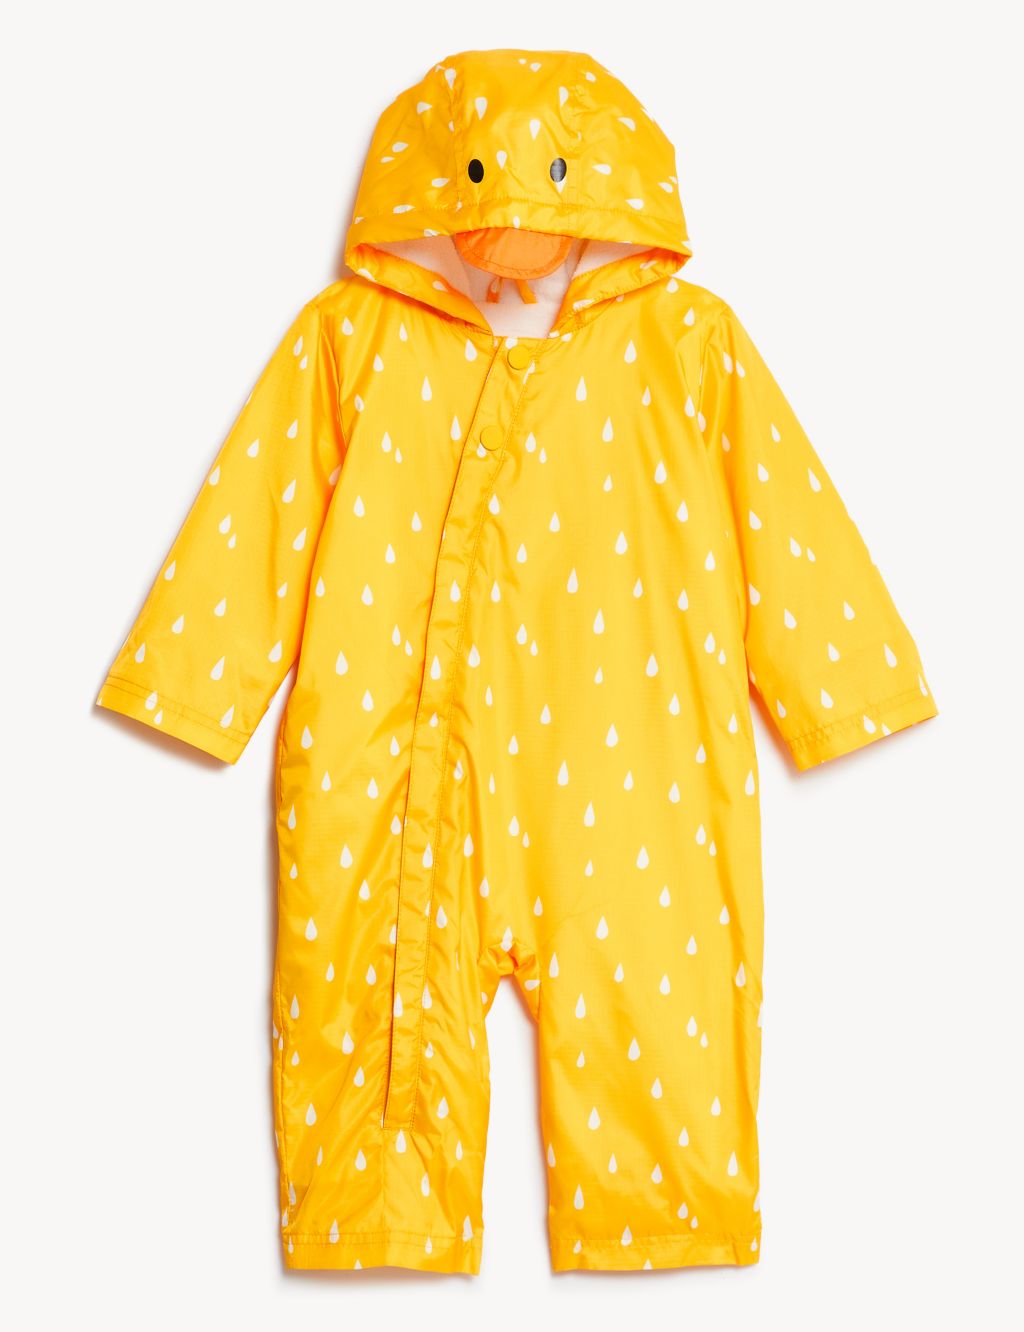 Stormwear™ Duck Puddle Suit (0-3 Yrs) image 2